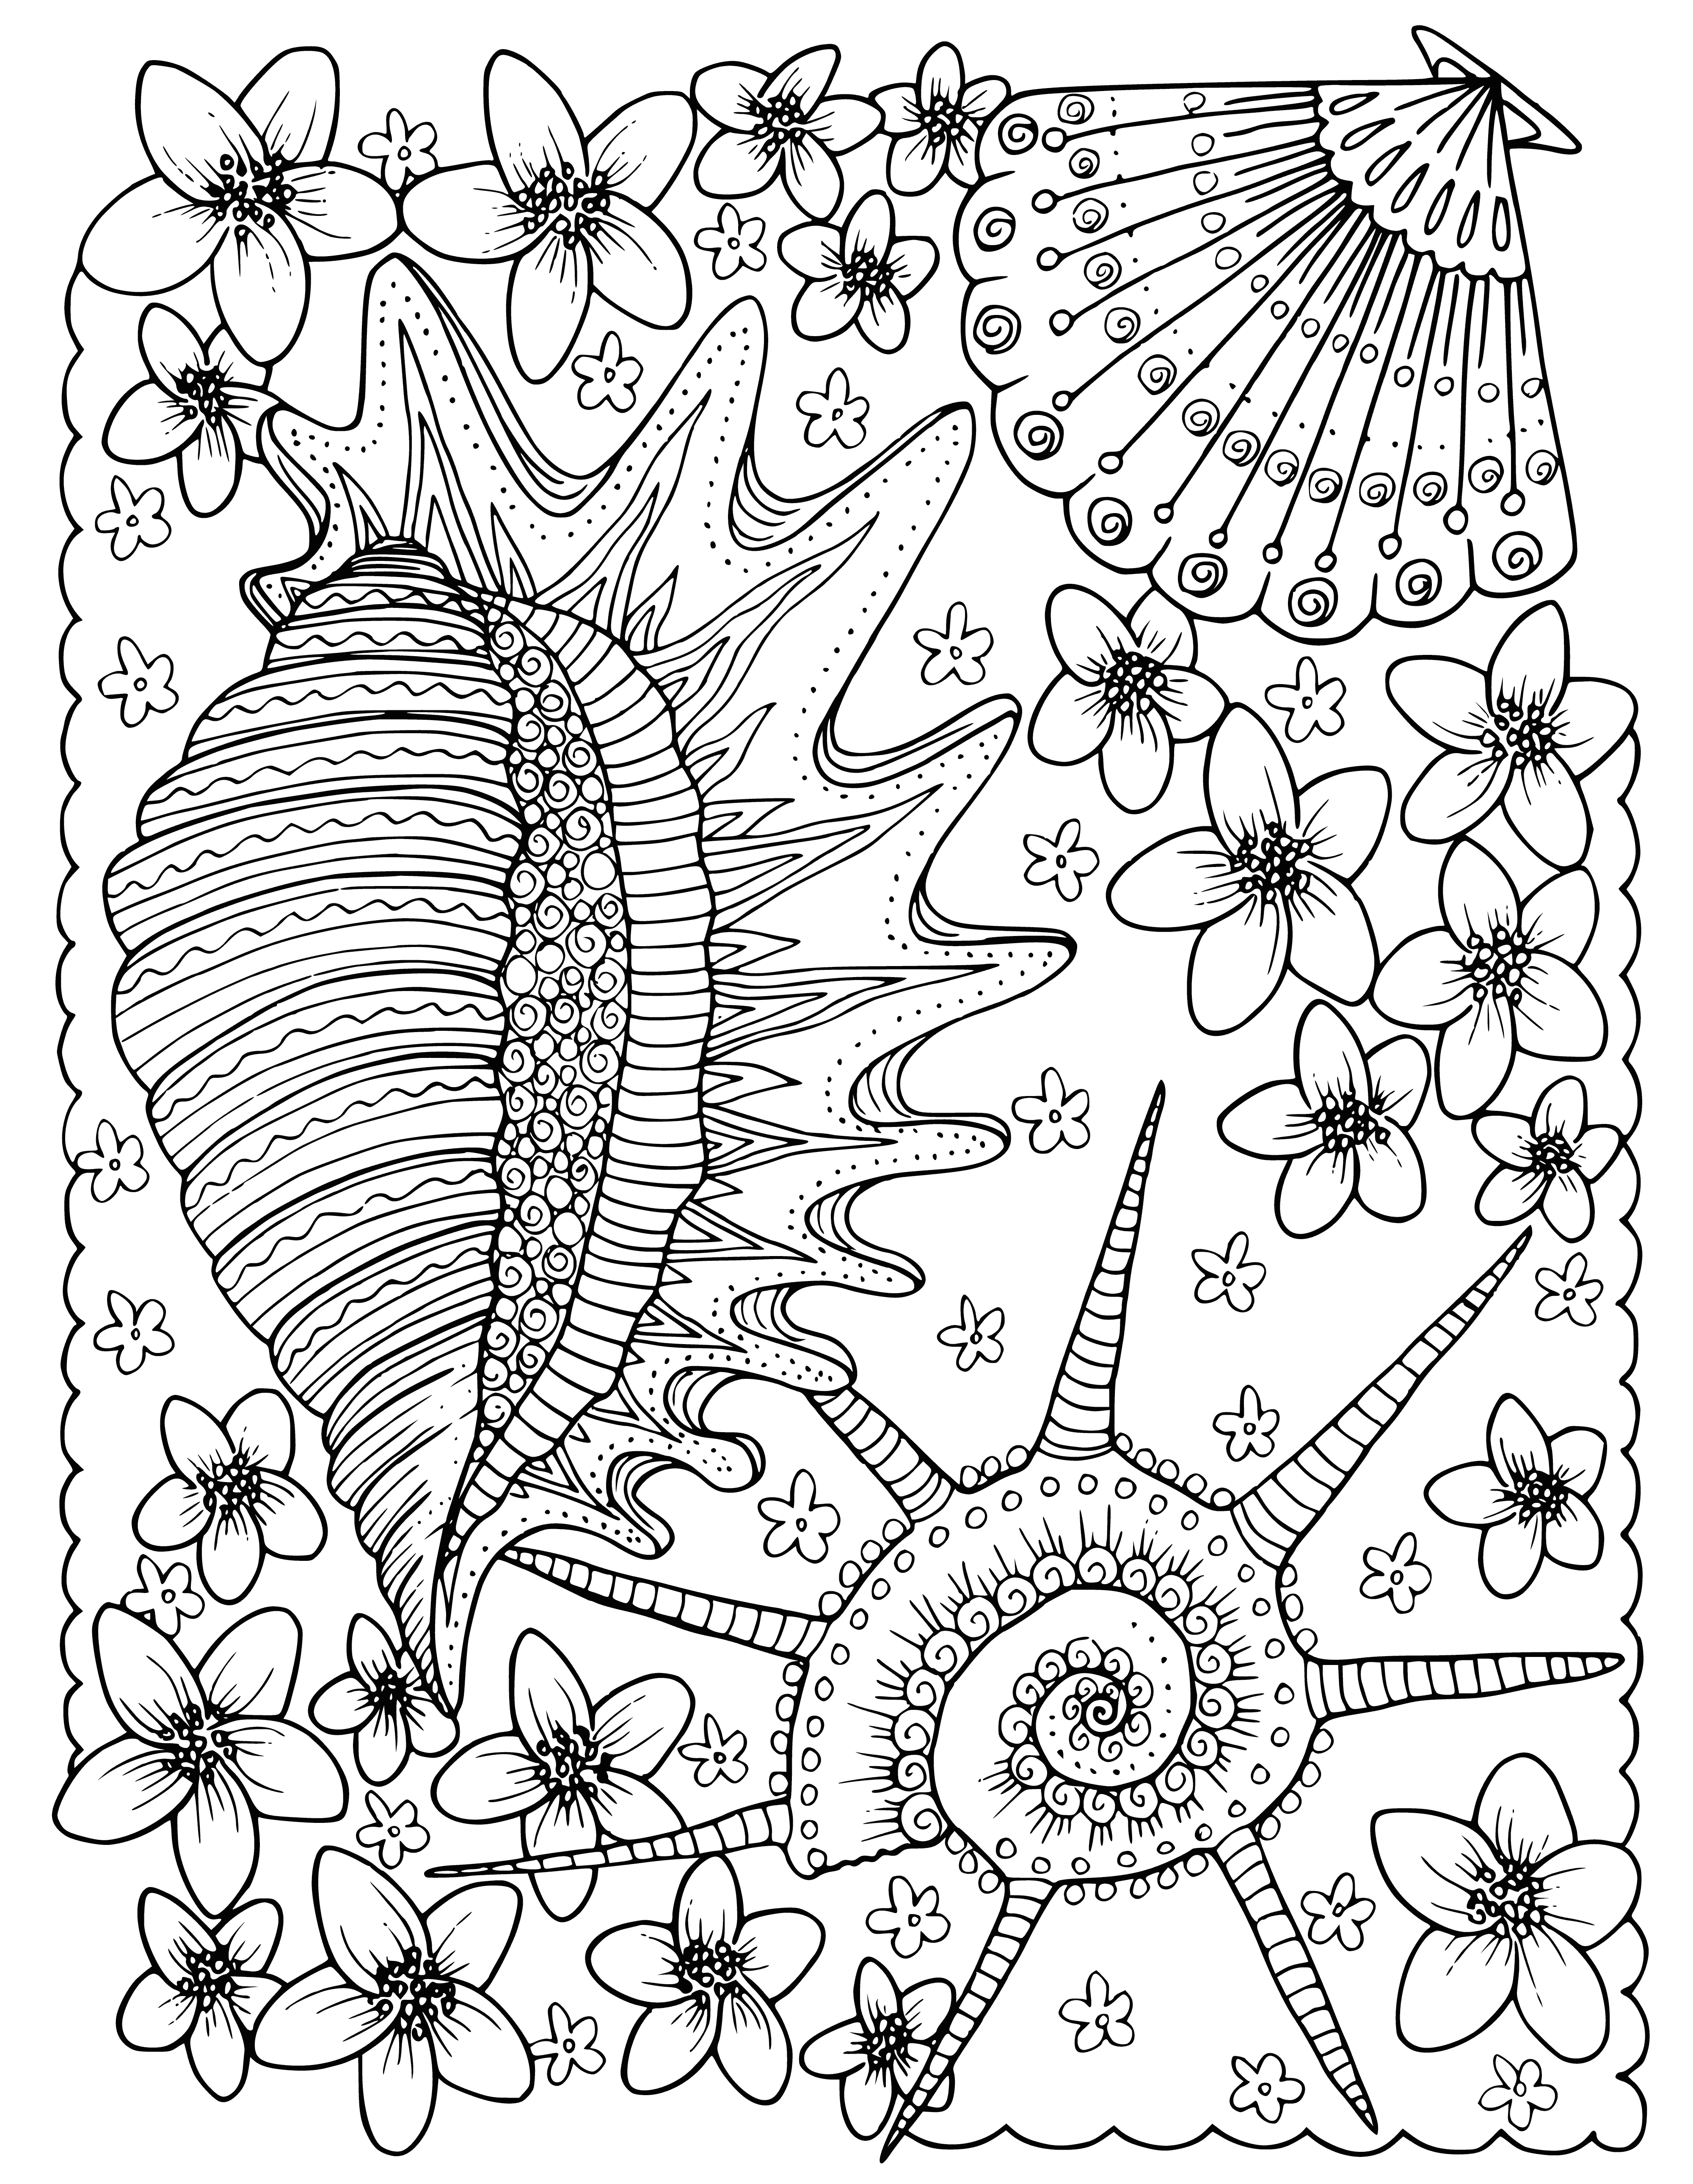 coloring page: Colorful beach shells of various sizes on a blue sky w/ clouds background. Have fun coloring!